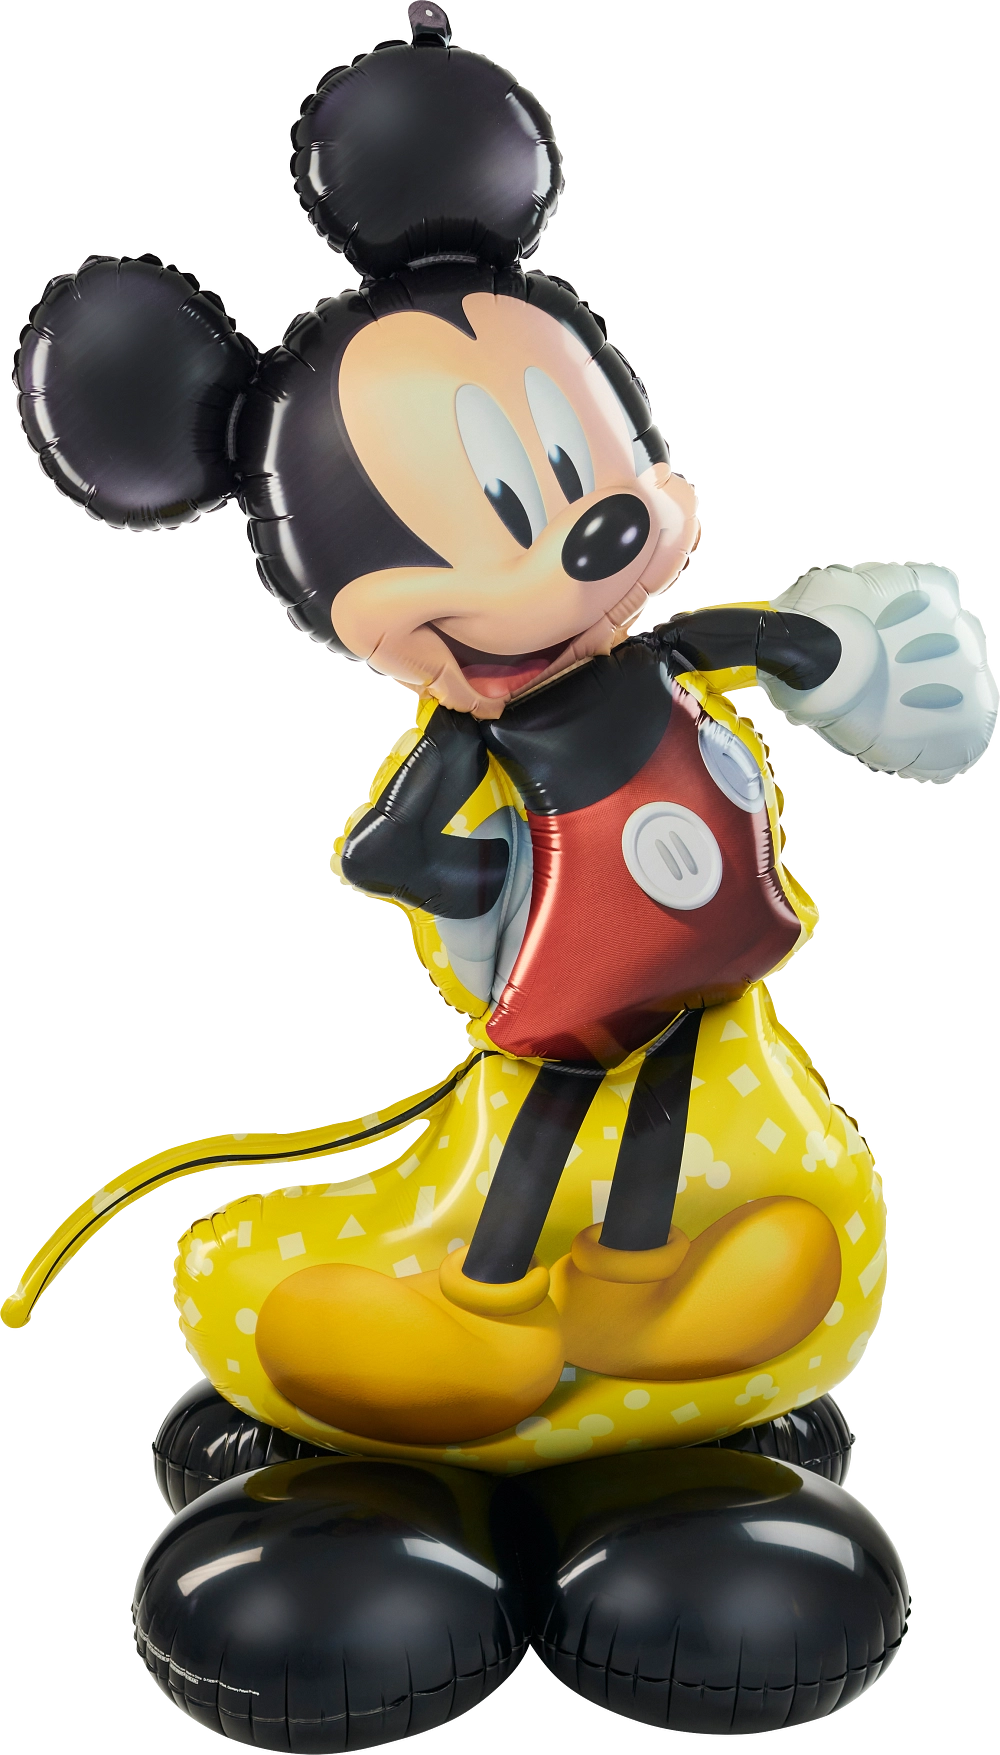 Airloonz Mickey Mouse 4337111